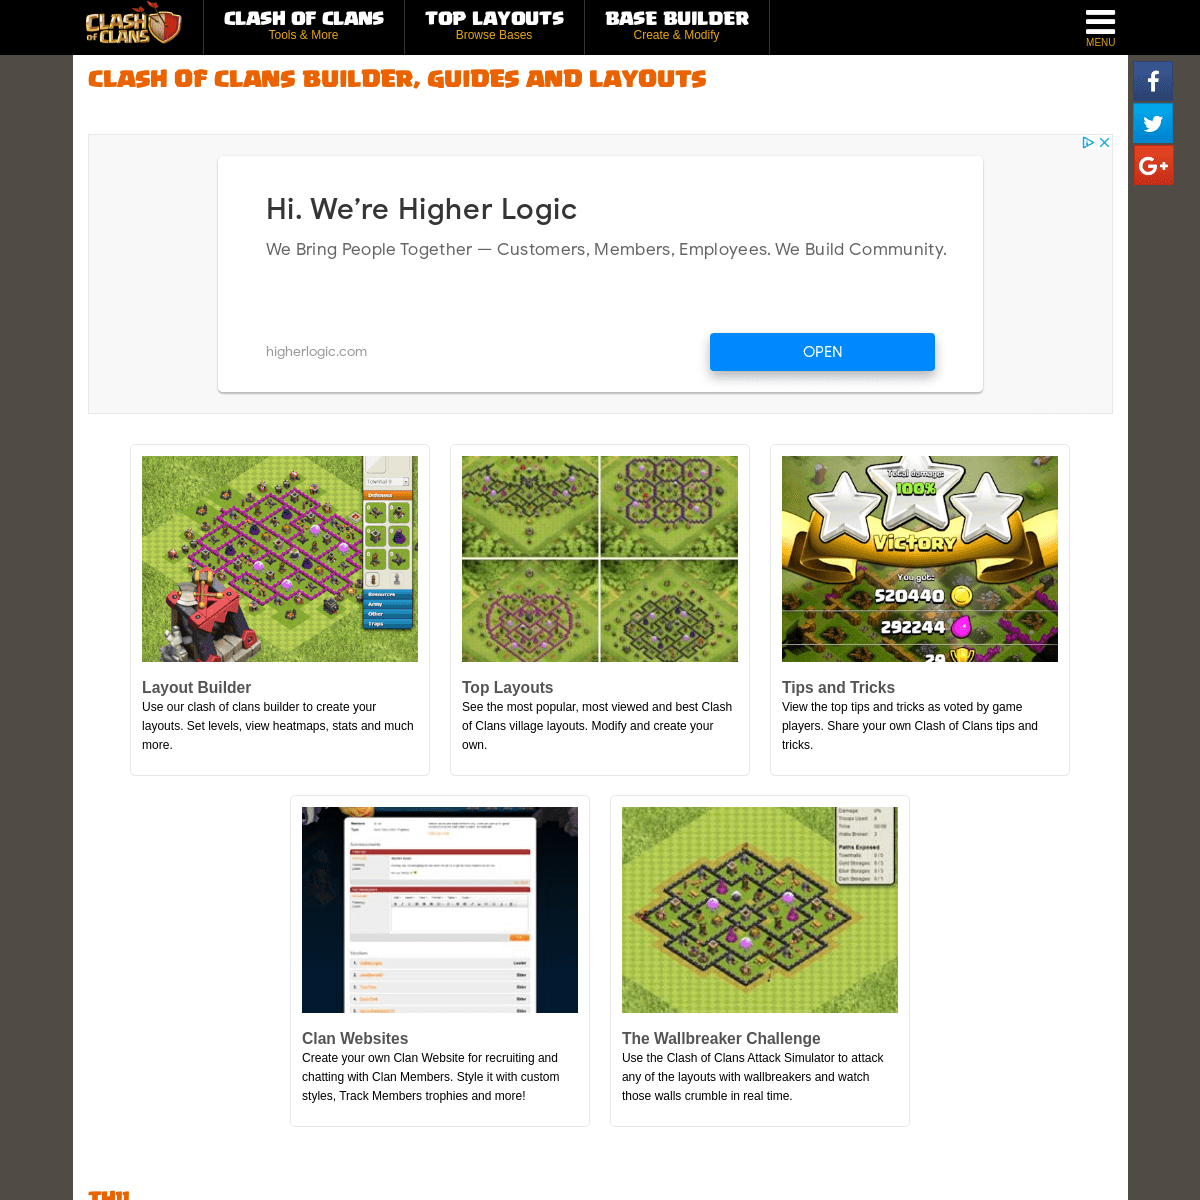 A complete backup of https://clashofclans-tools.com